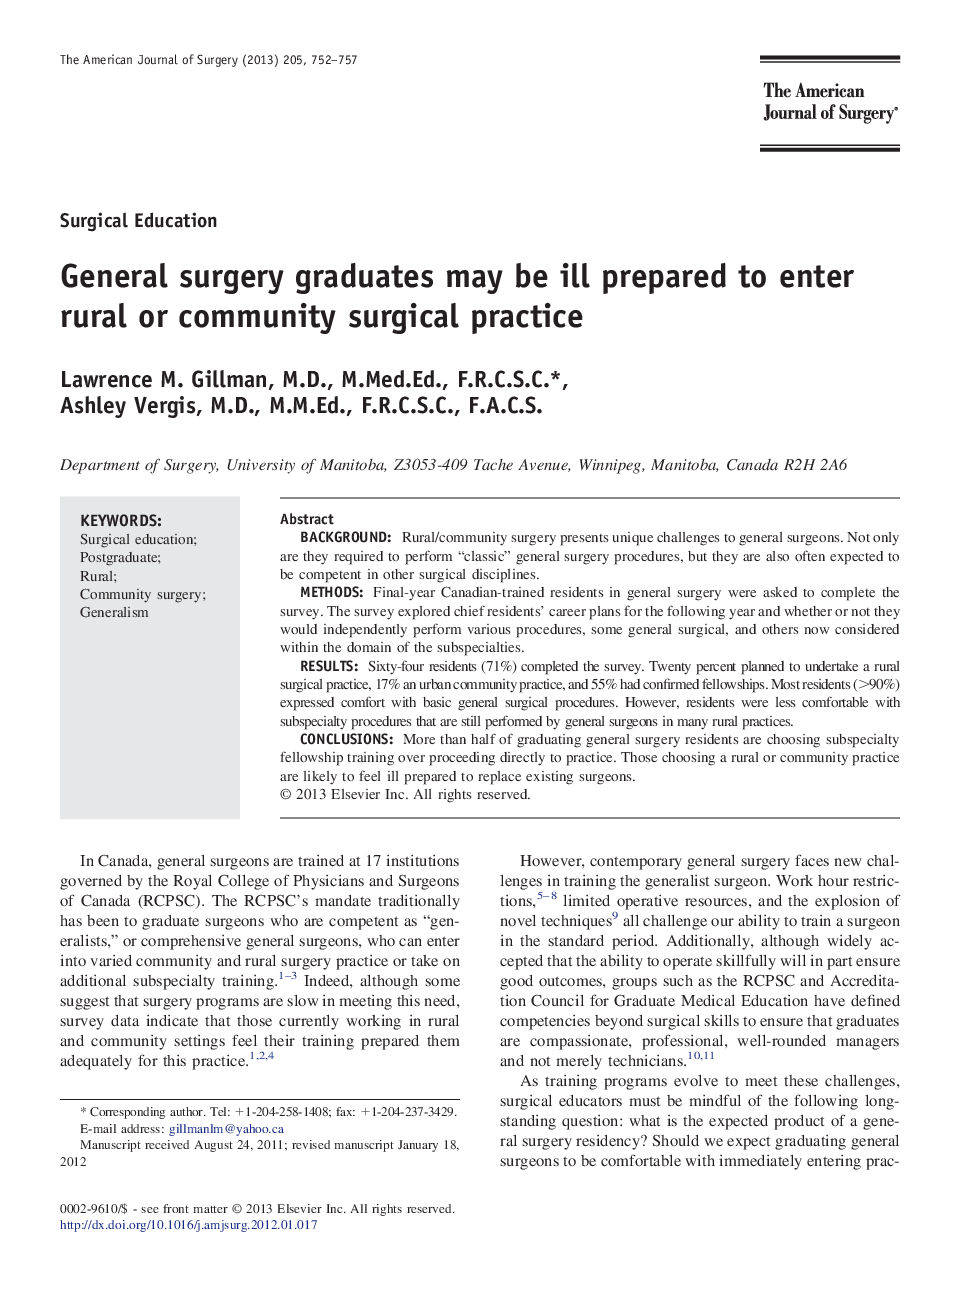 General surgery graduates may be ill prepared to enter rural or community surgical practice